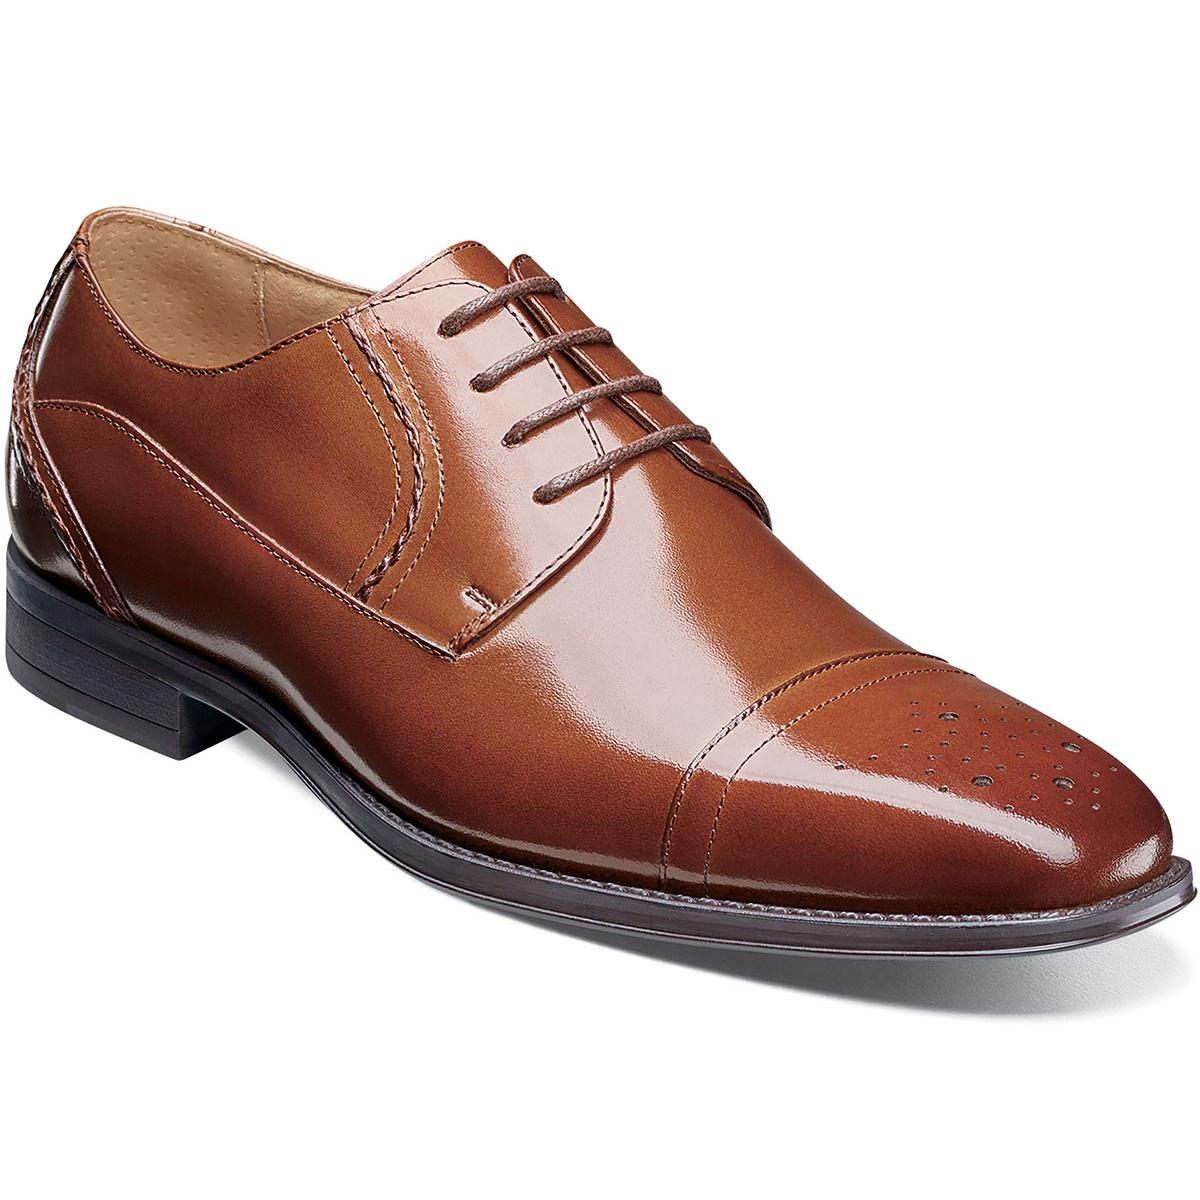 Stacy Adams Powell Cognac Genuine Leather Cap Toe Oxford Shoes 25246 ...